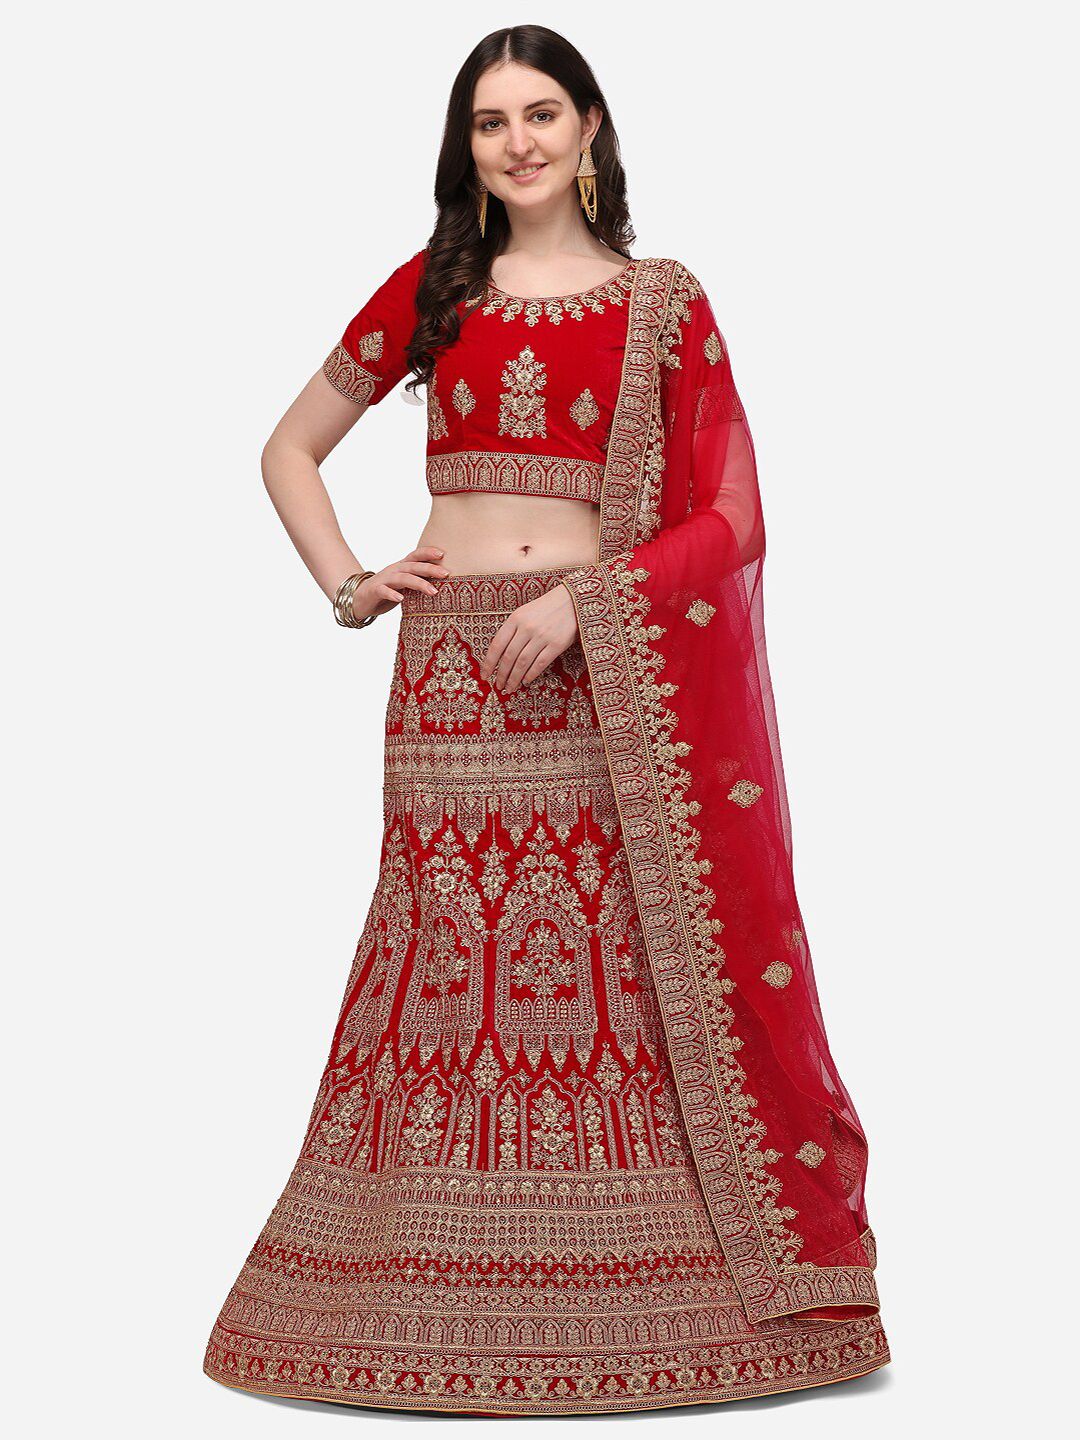 VRSALES Red & Gold-Toned Embroidered Semi-Stitched Lehenga & Unstitched Blouse With Dupatta Price in India